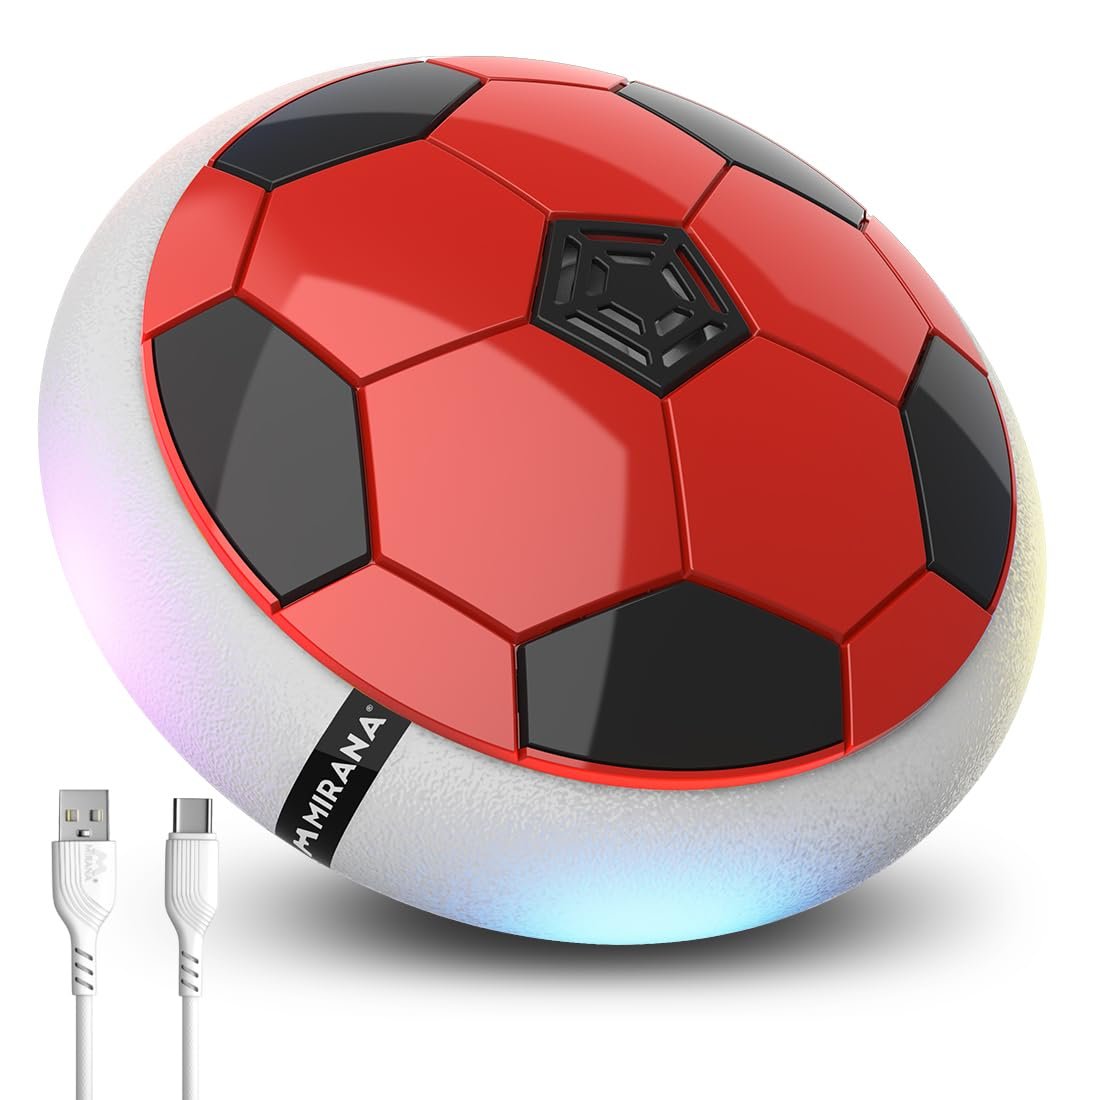 Mirana C-Type USB Rechargeable Hover Football image1